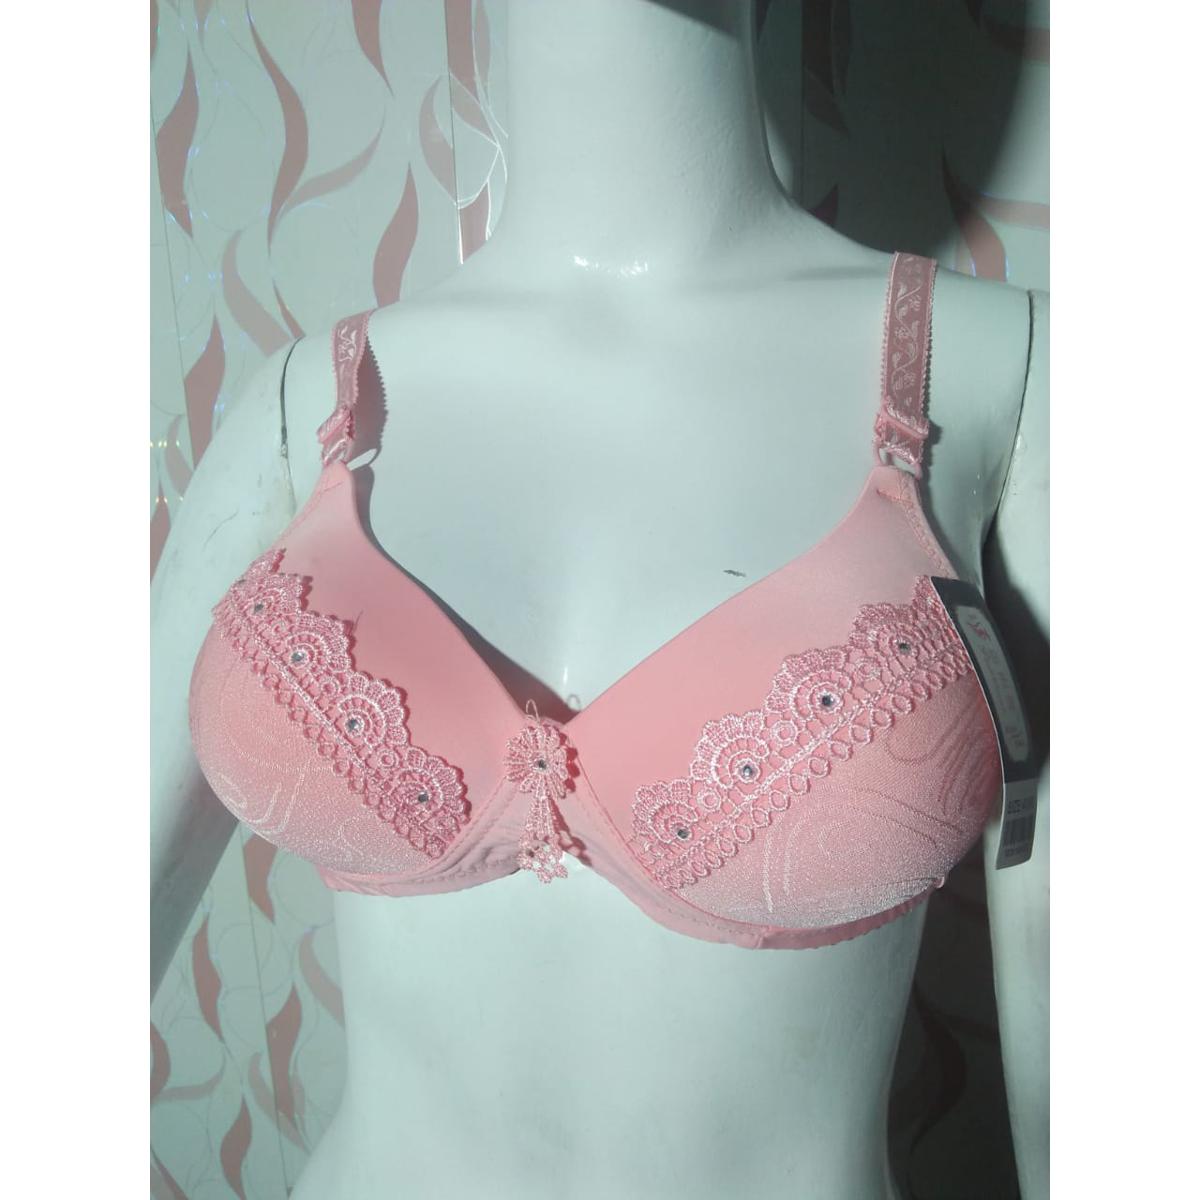 pack of 2-foam bra for ladies women, size 32 to 42, high quality